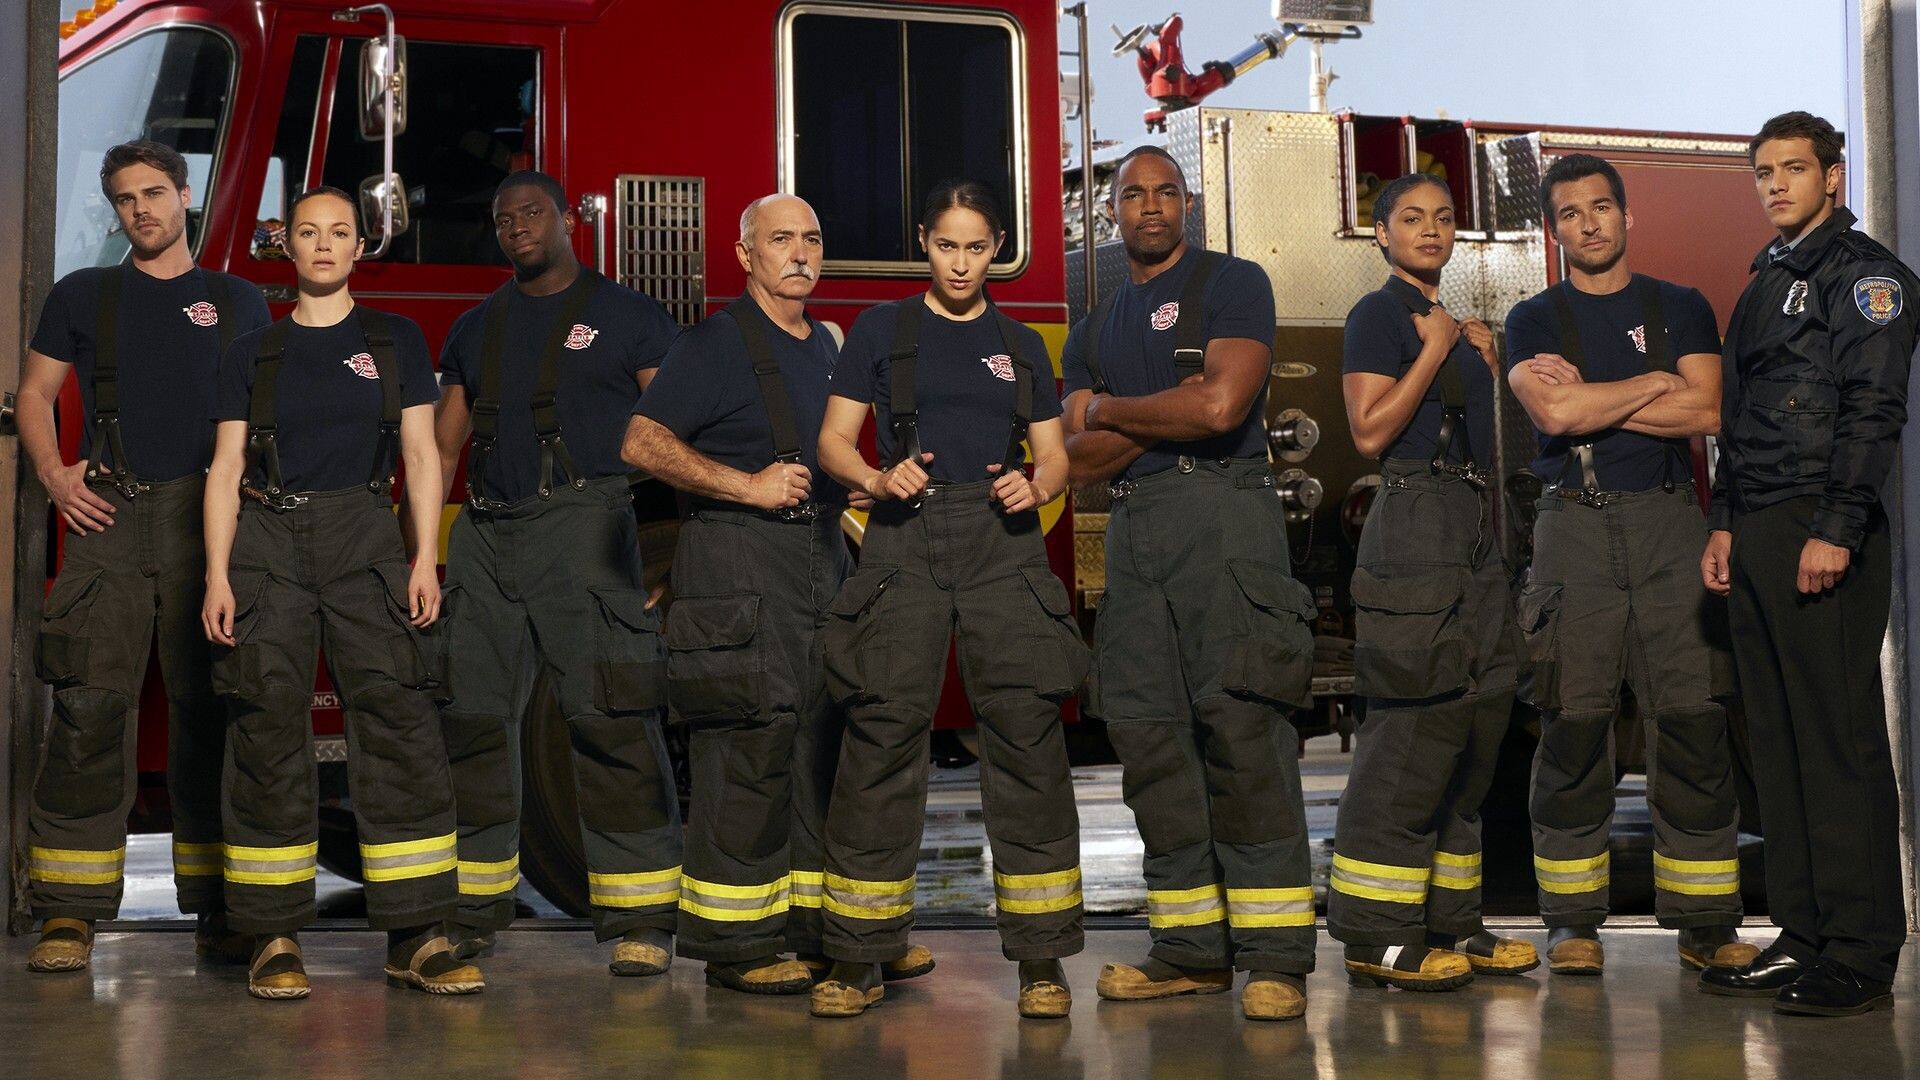 Station 19 (TV Series): One Of The Most Popular Shows About Firemans, Season 3 Cast, 16 Episodes, 2020, Firefighters Station, Firetruck. 1920x1080 Full HD Background.